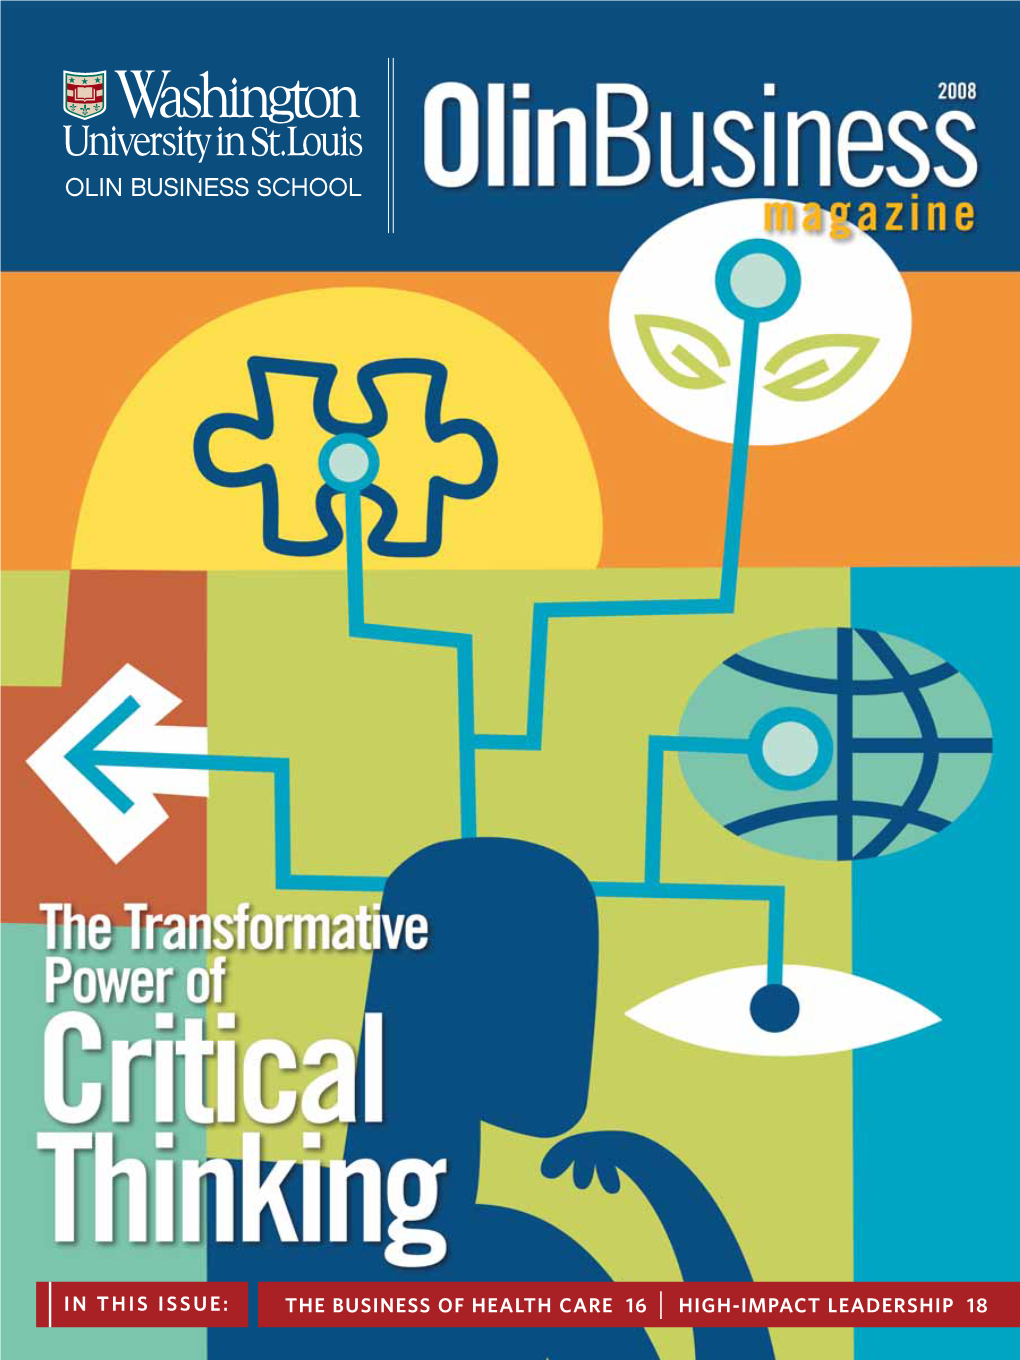 The Business of Health Care 16 High-Impact Leadership 18 in This Issue